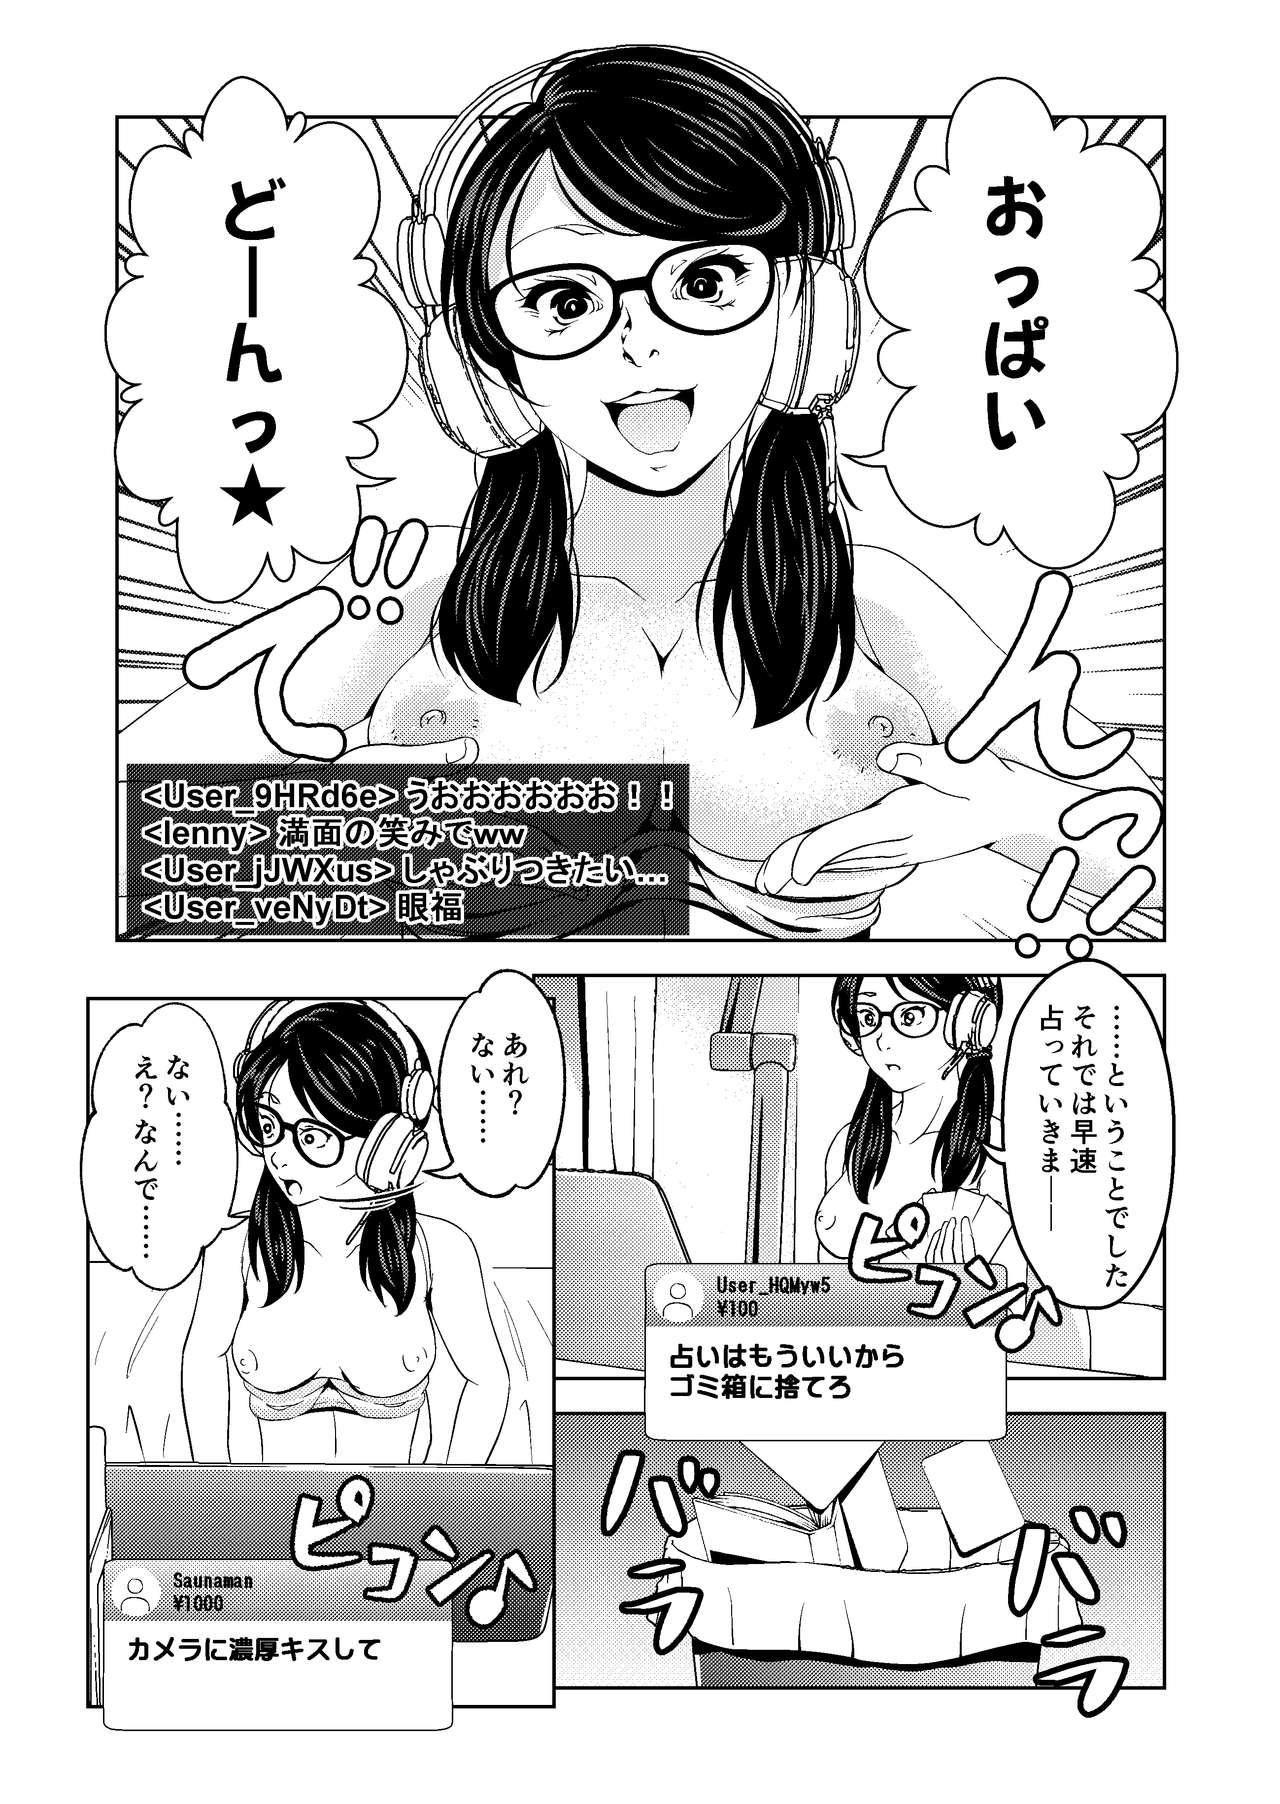 Transsexual Saimin Stream 1.2 | HypnosiS Streams Episode 1.2 Shaven - Page 9